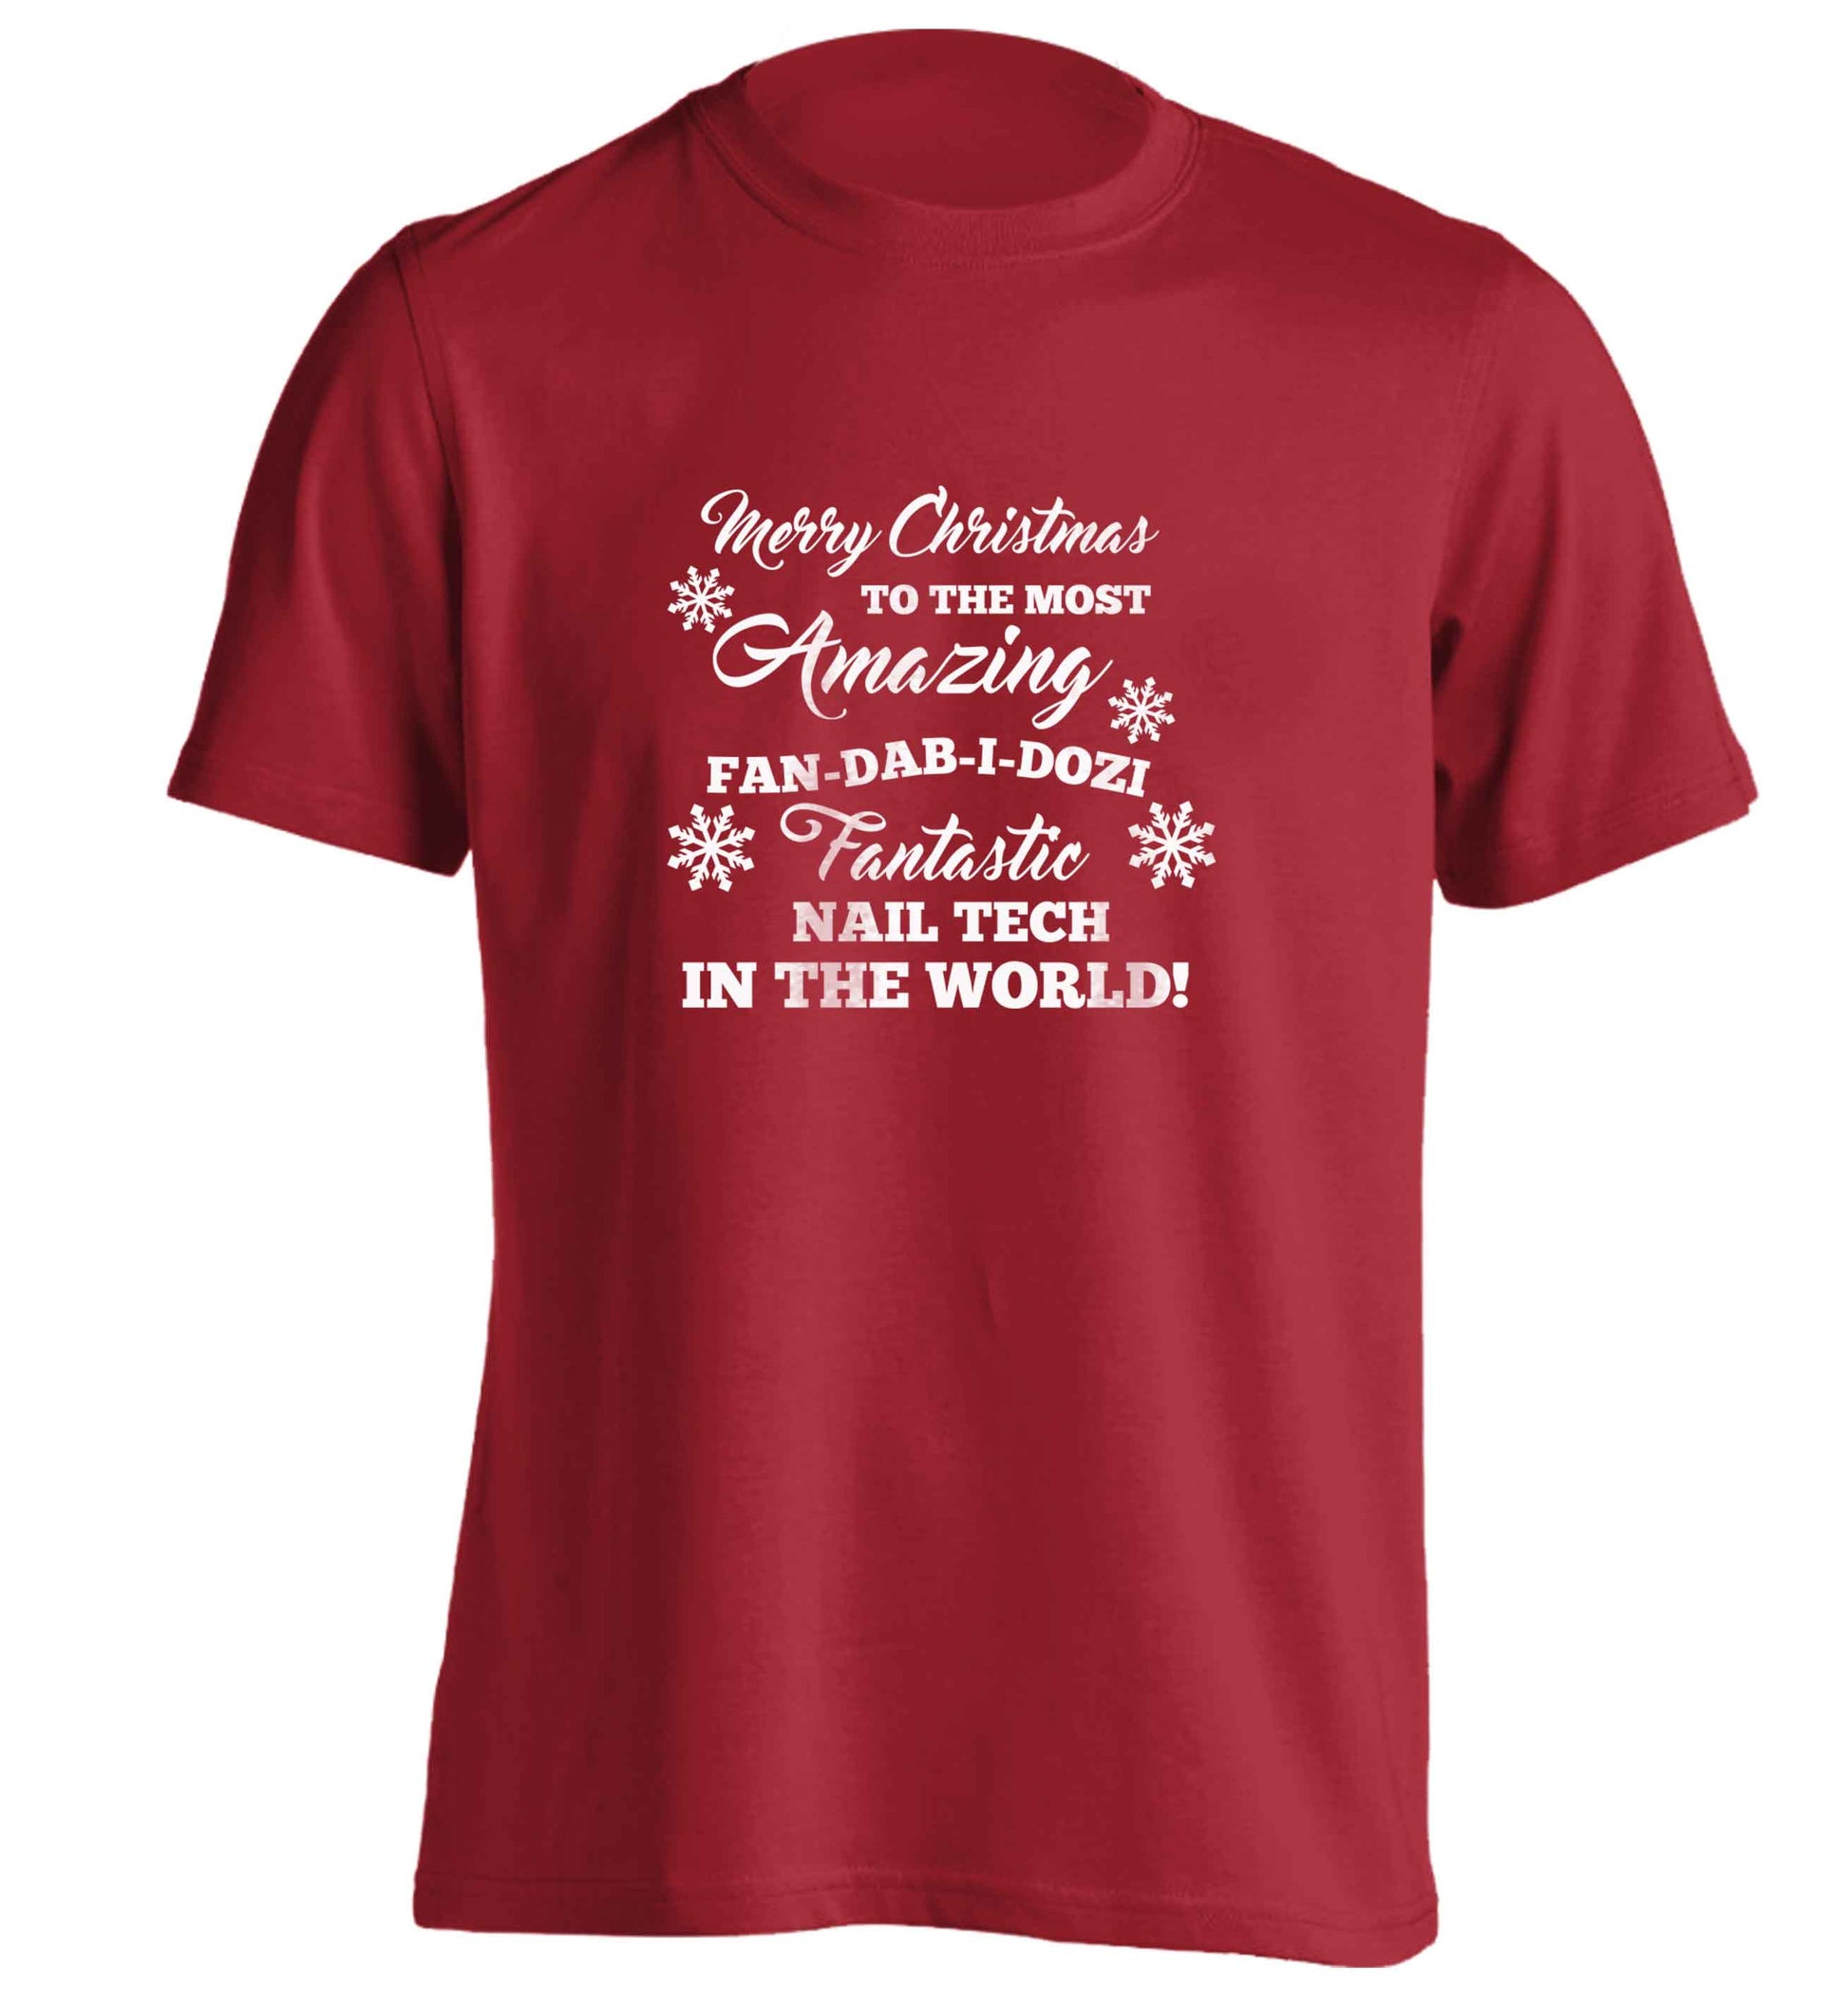 Merry Christmas to the most amazing fan-dab-i-dozi fantasic nail technician in the world adults unisex red Tshirt 2XL